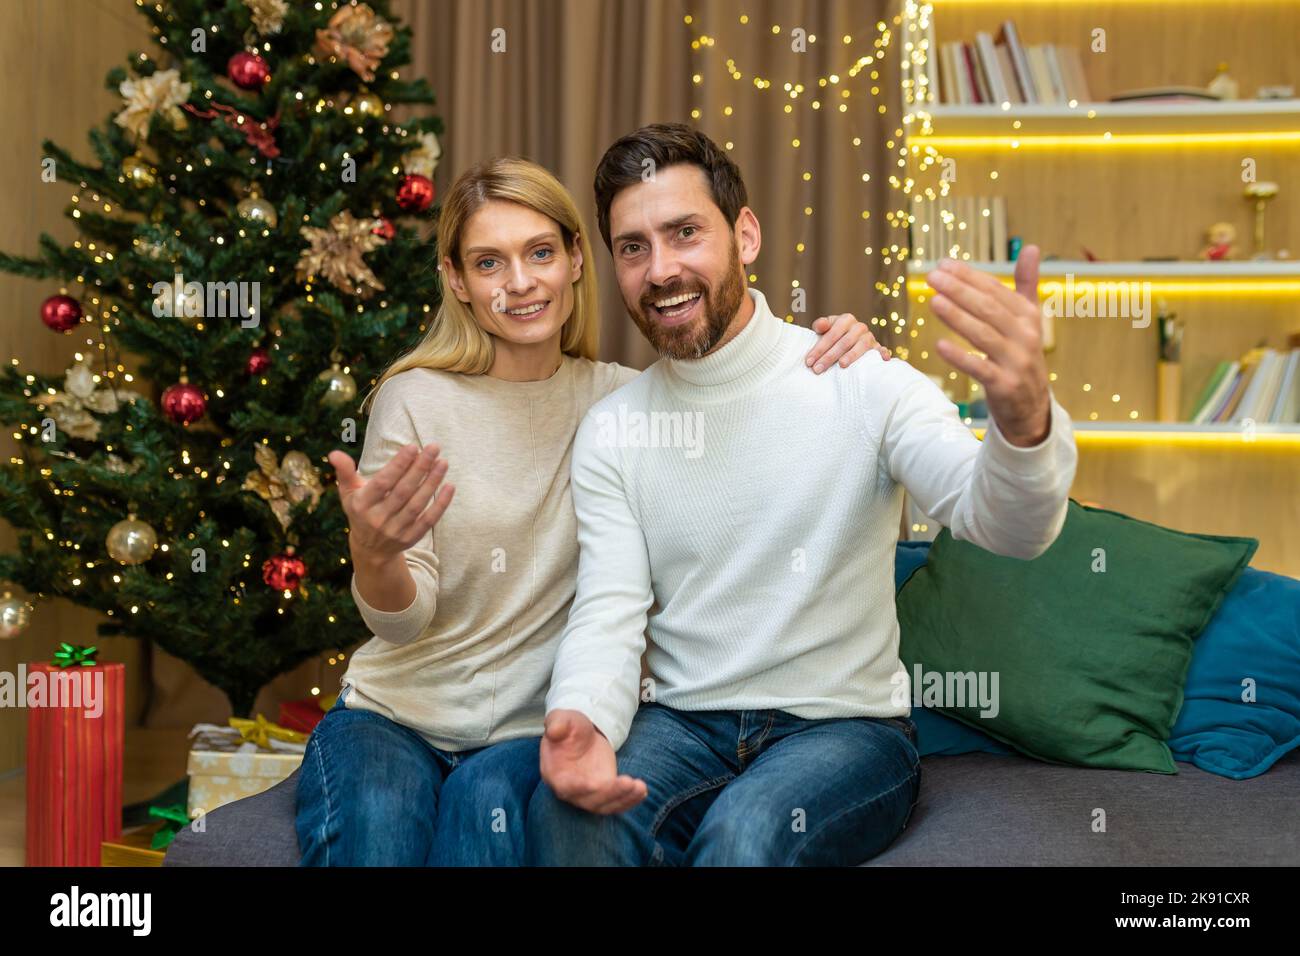 Video call family couple, a man and a woman, are talking to friends, remotely looking at the web camera, and waving and greeting, inviting friends to visit to celebrate Christmas and the New Year. Stock Photo